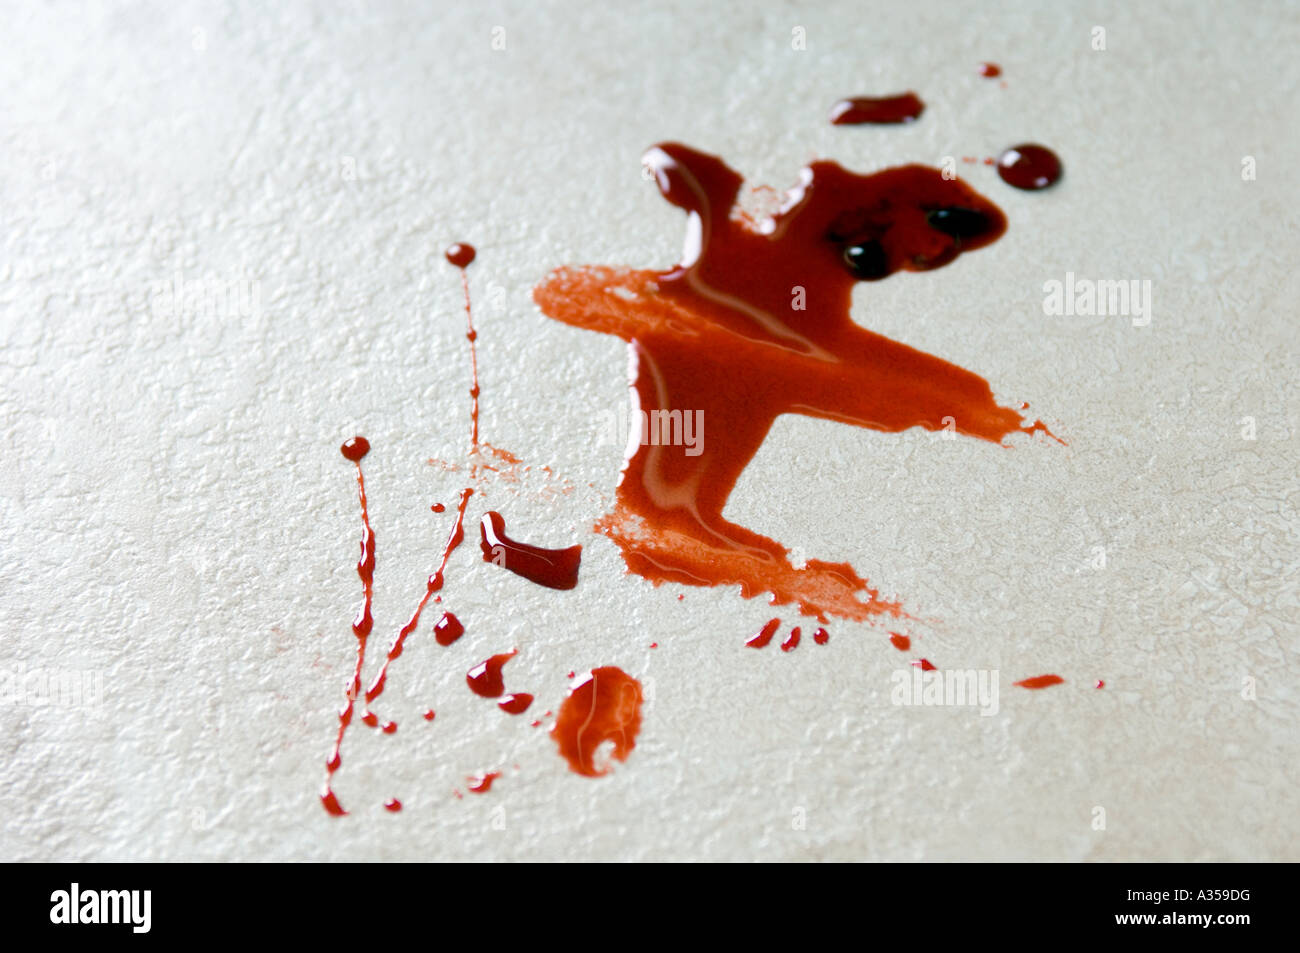 blood stains on a floor Stock Photo